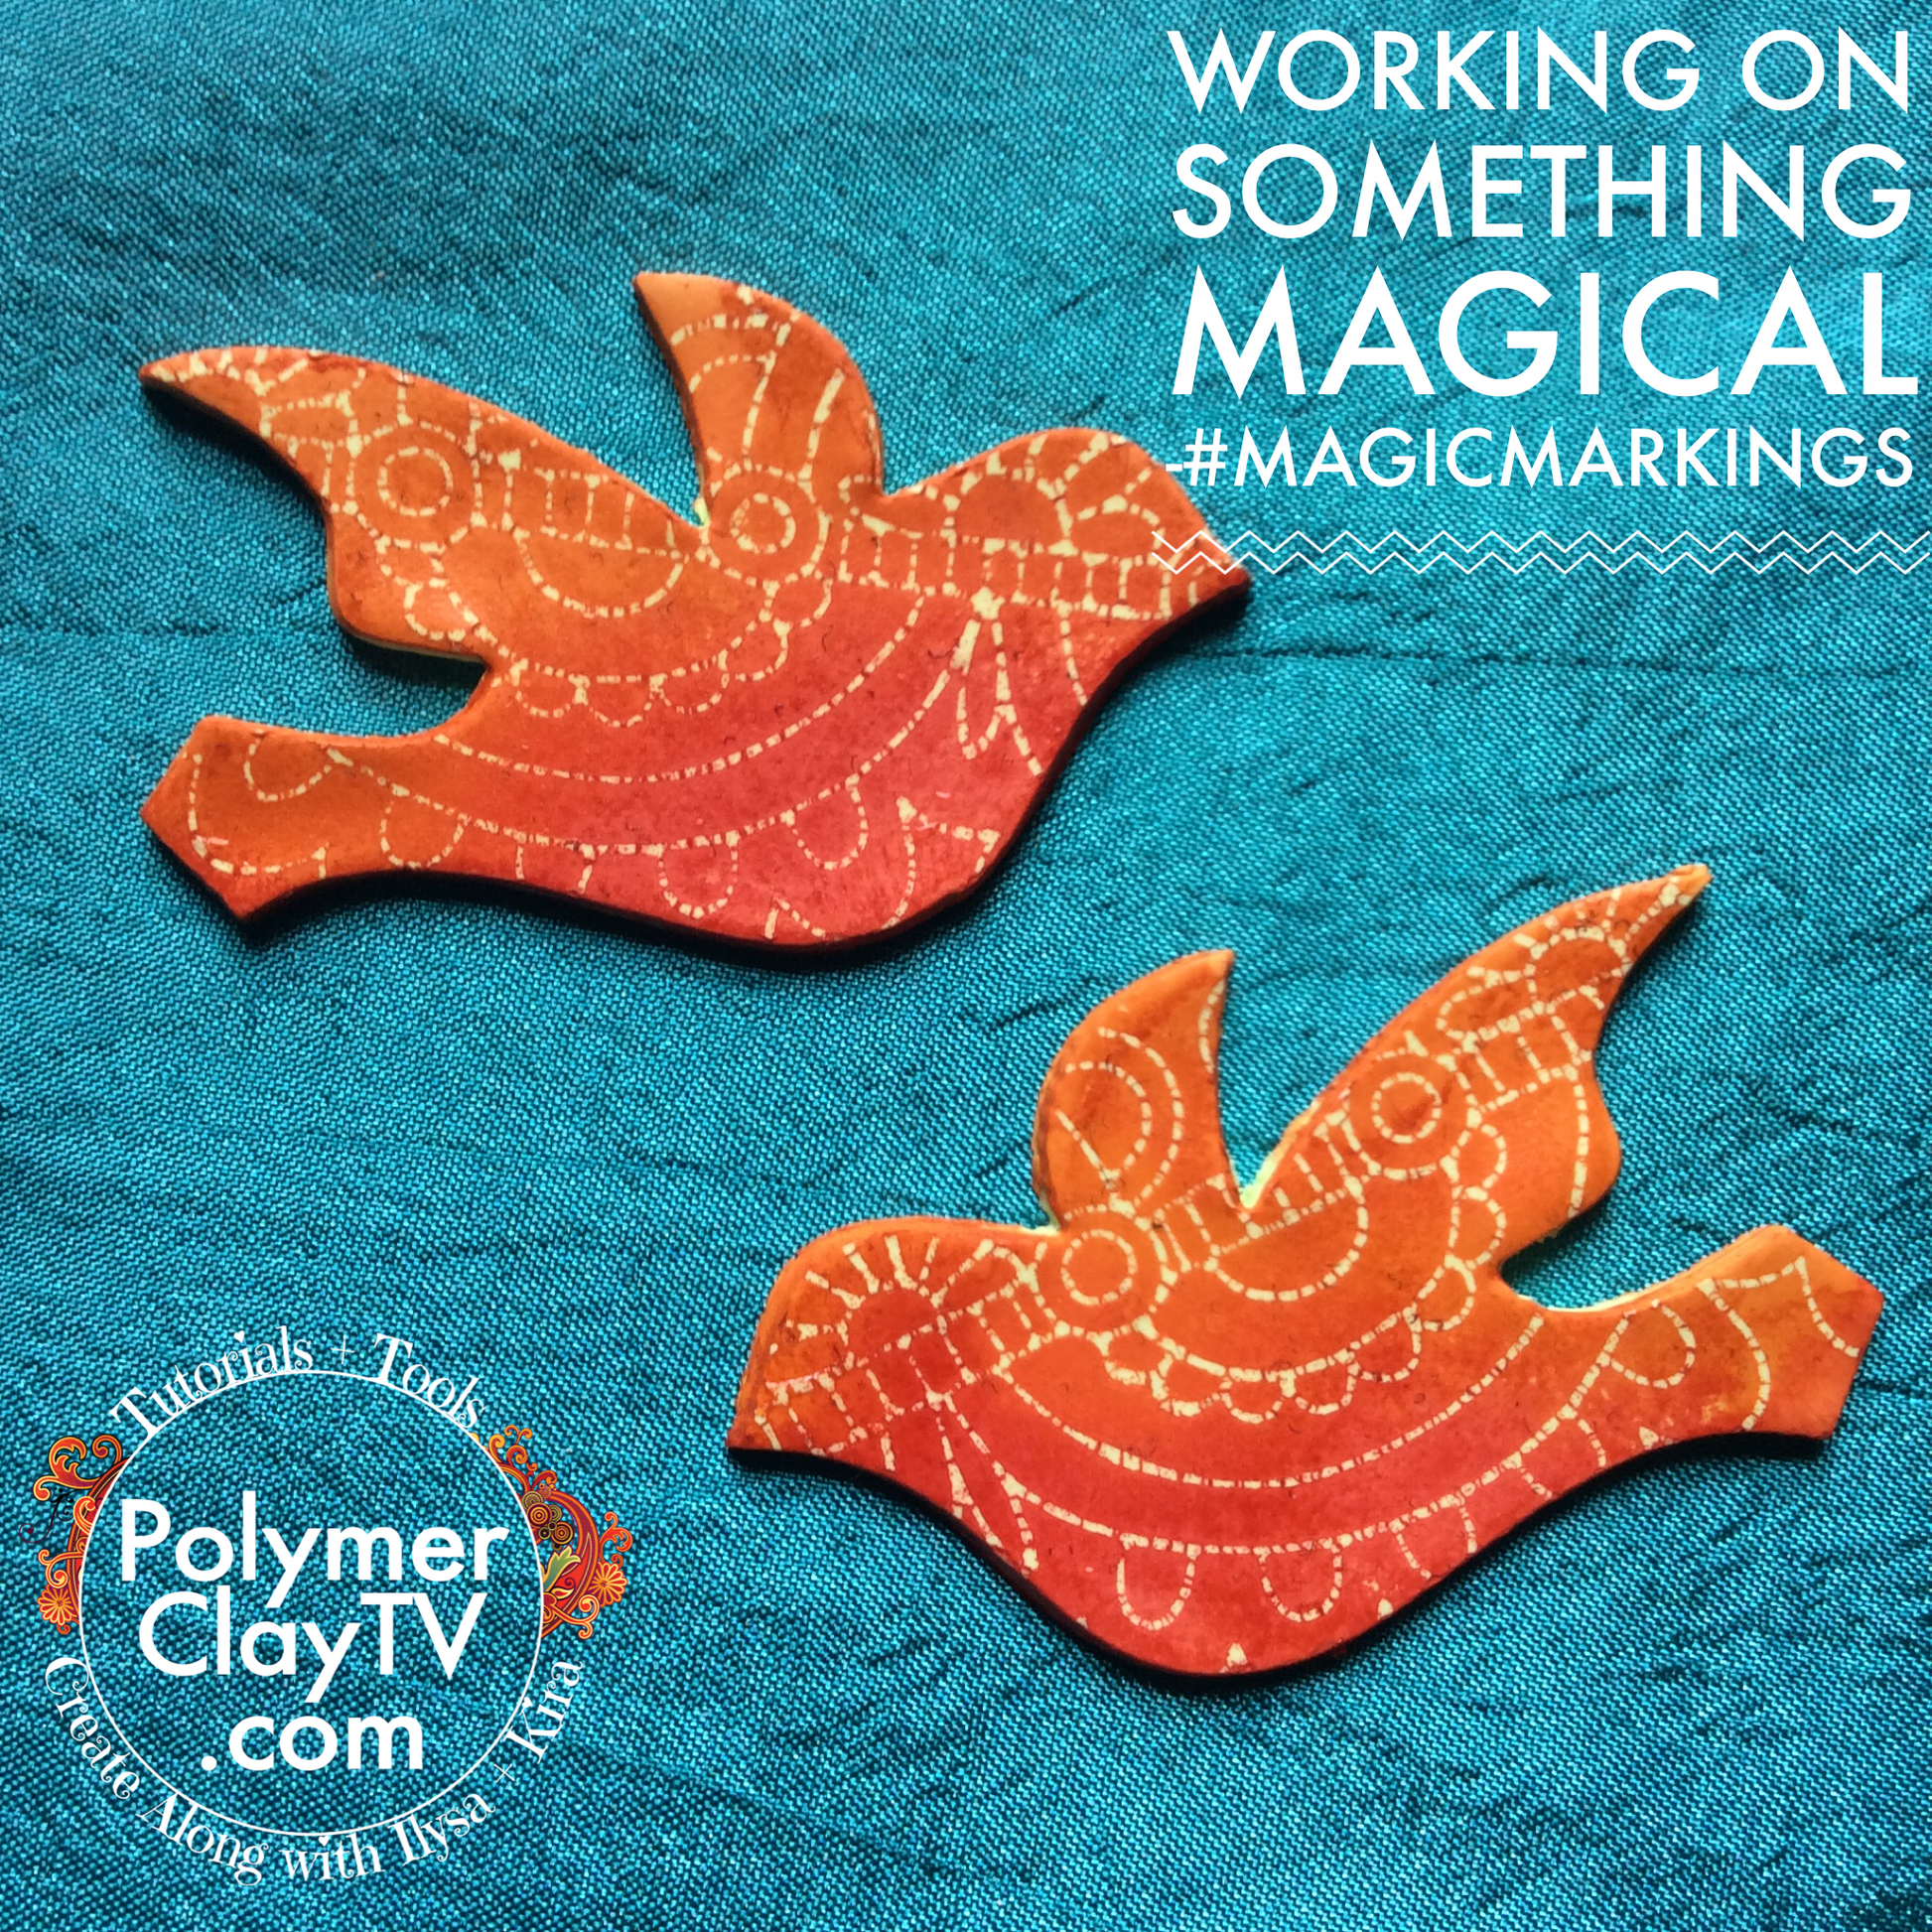 Magic Markings PDF tutorial for interesting patterned designs on polymer clay - Polymer Clay TV tutorial and supplies